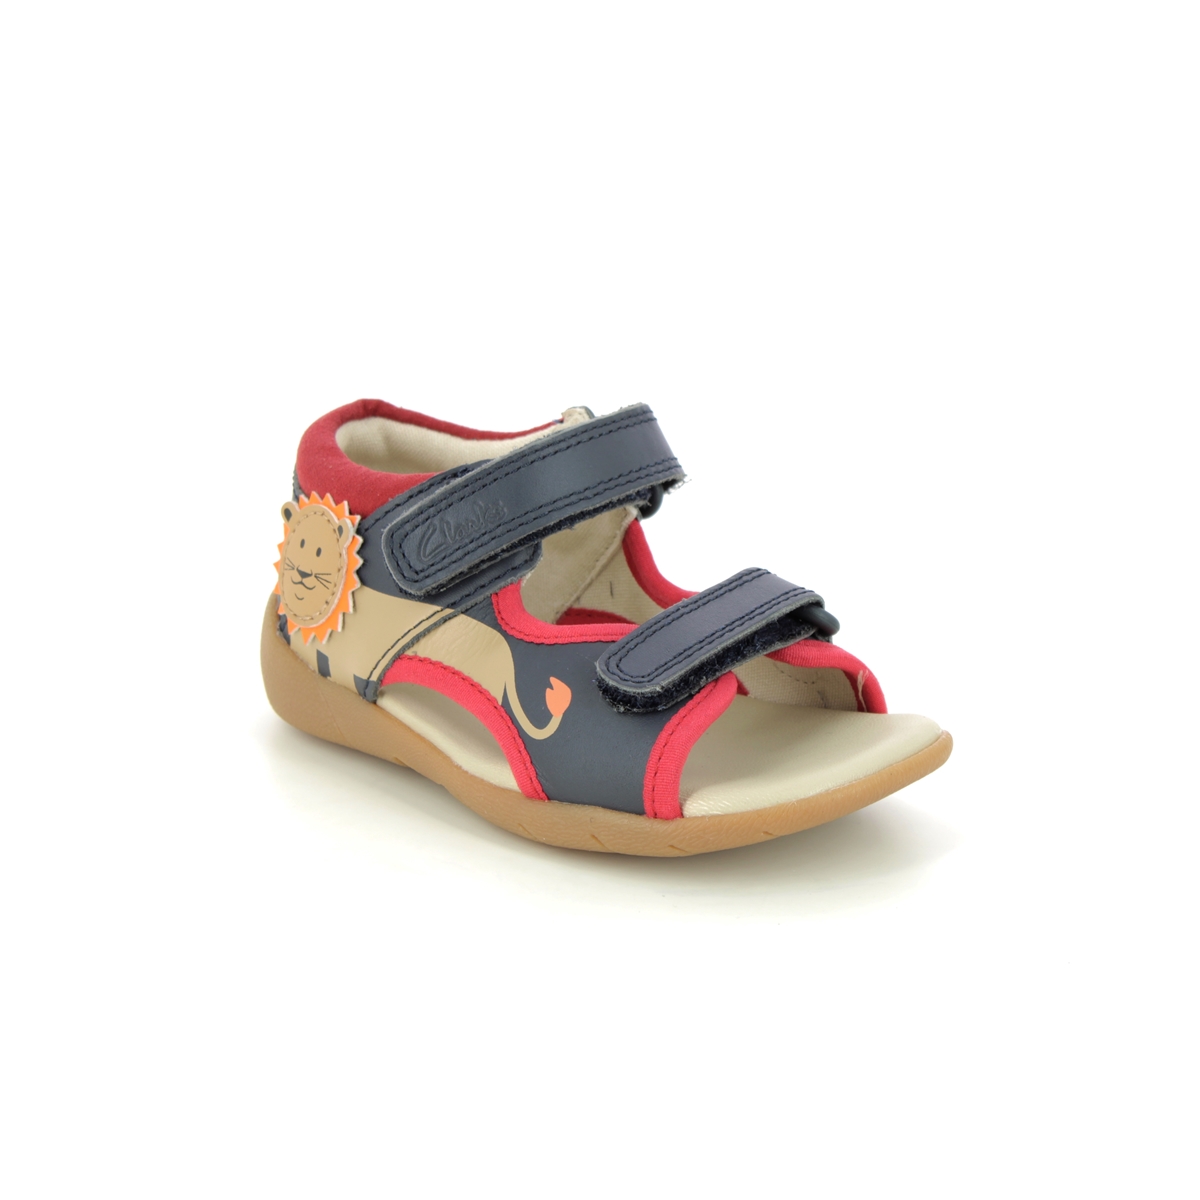 Clarks Zora Jungle T Navy Leather Kids Boys Sandals 646216F In Size 6 In Plain Navy Leather F Width Fitting Regular Fit For kids